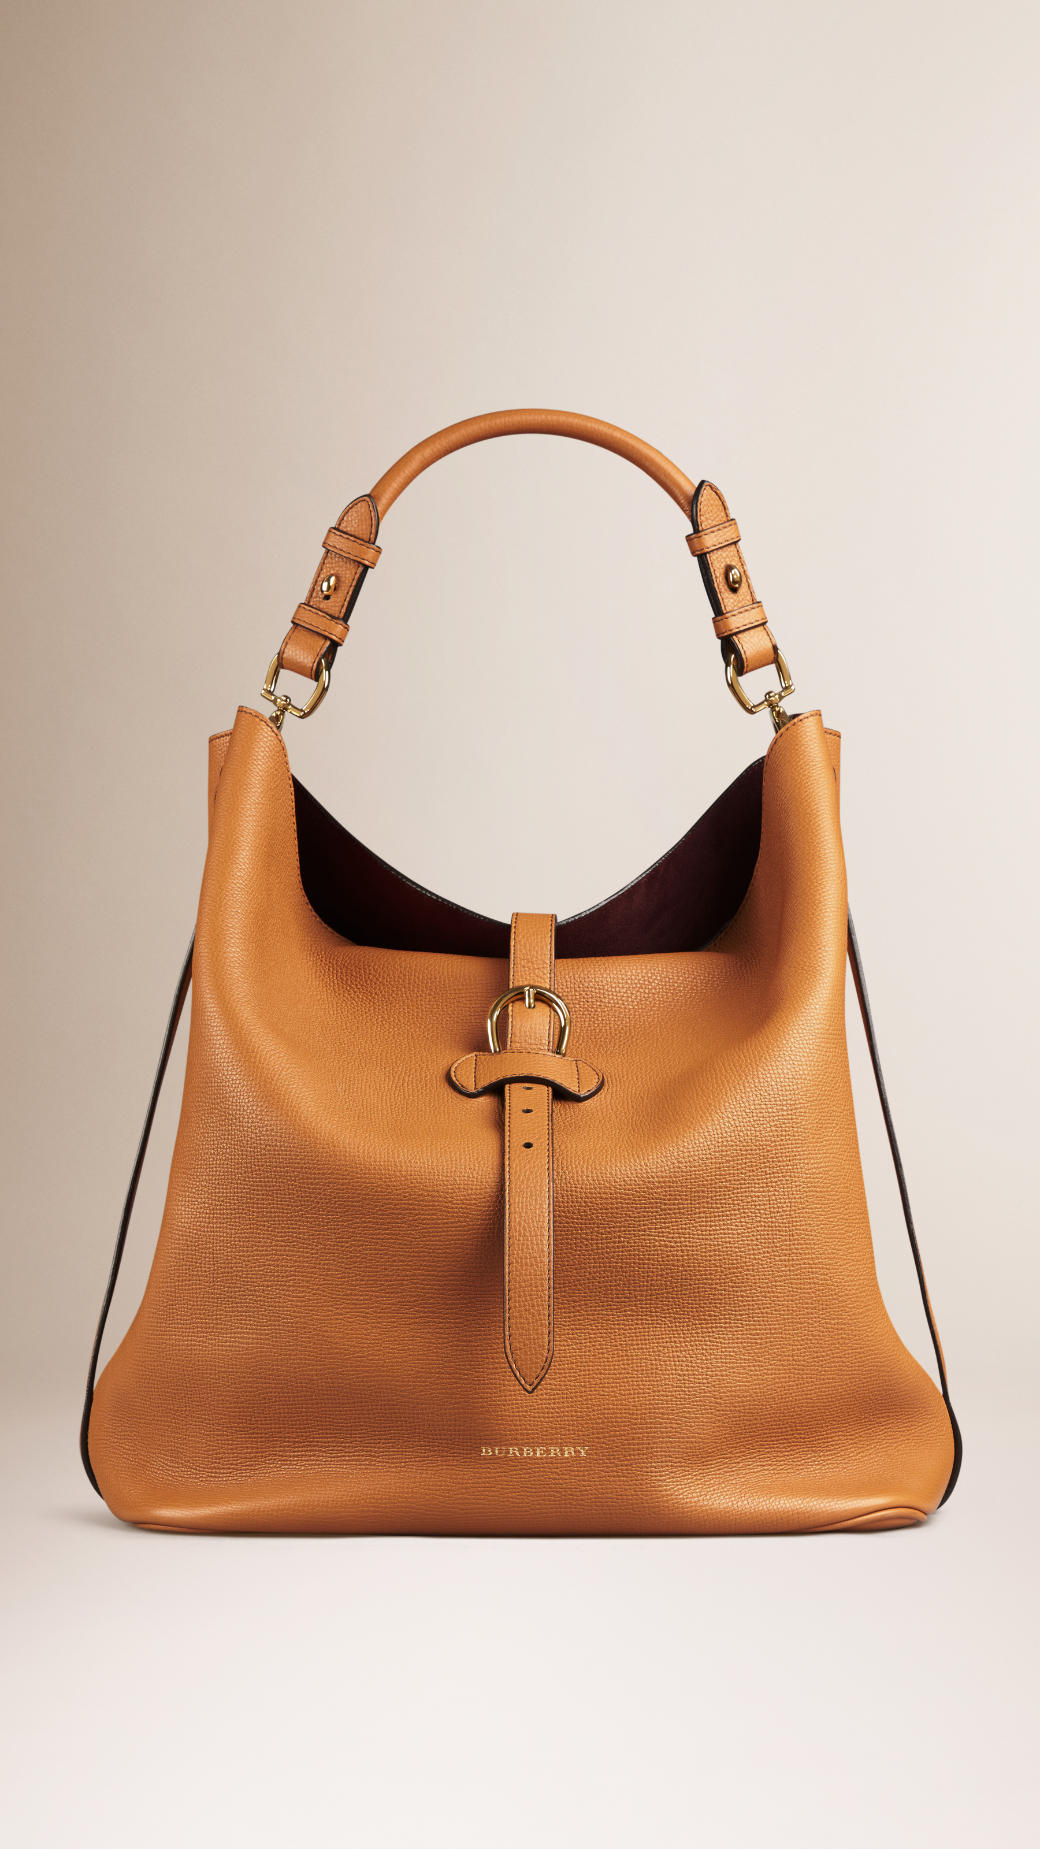 Burberry Large Buckle Detail Leather Hobo Bag in Brown (cognac) | Lyst